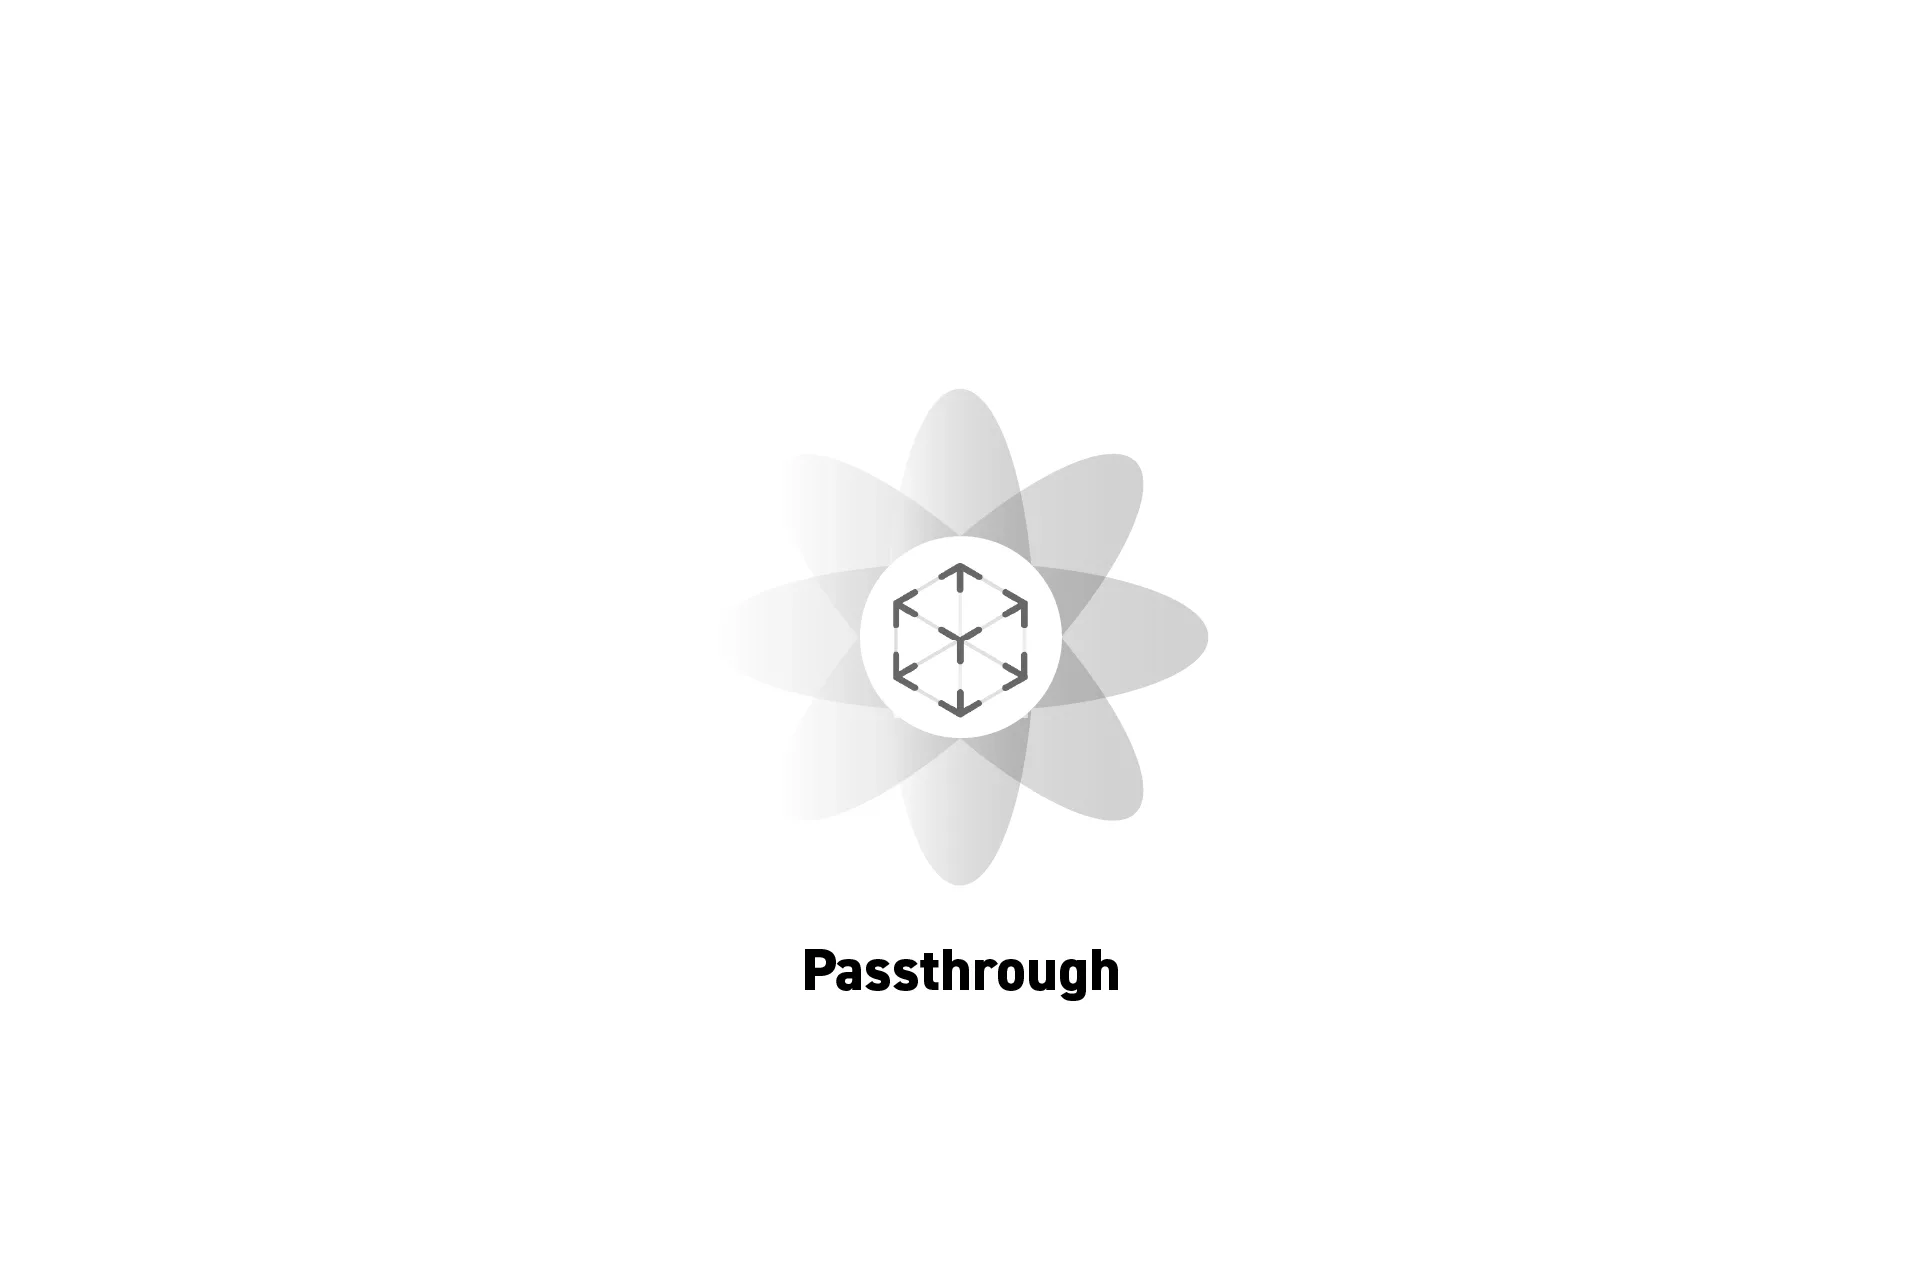 A flower that represents spatial computing with the text "Passthrough" beneath it.